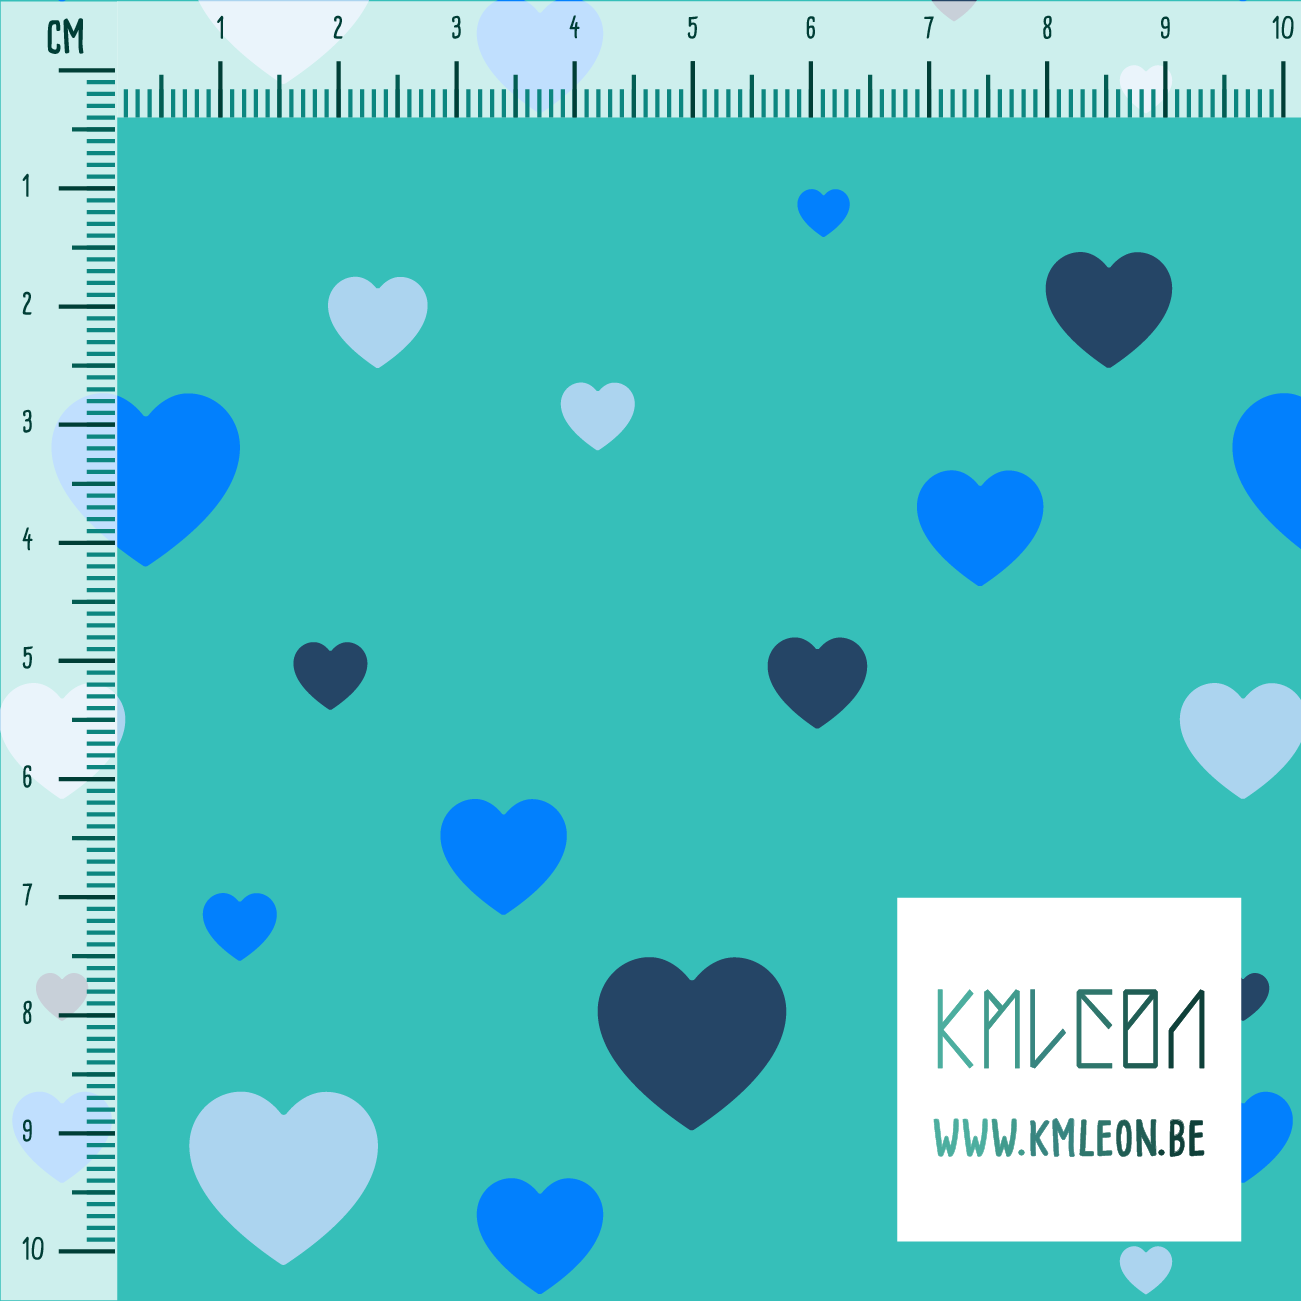 Blue and navy hearts fabric